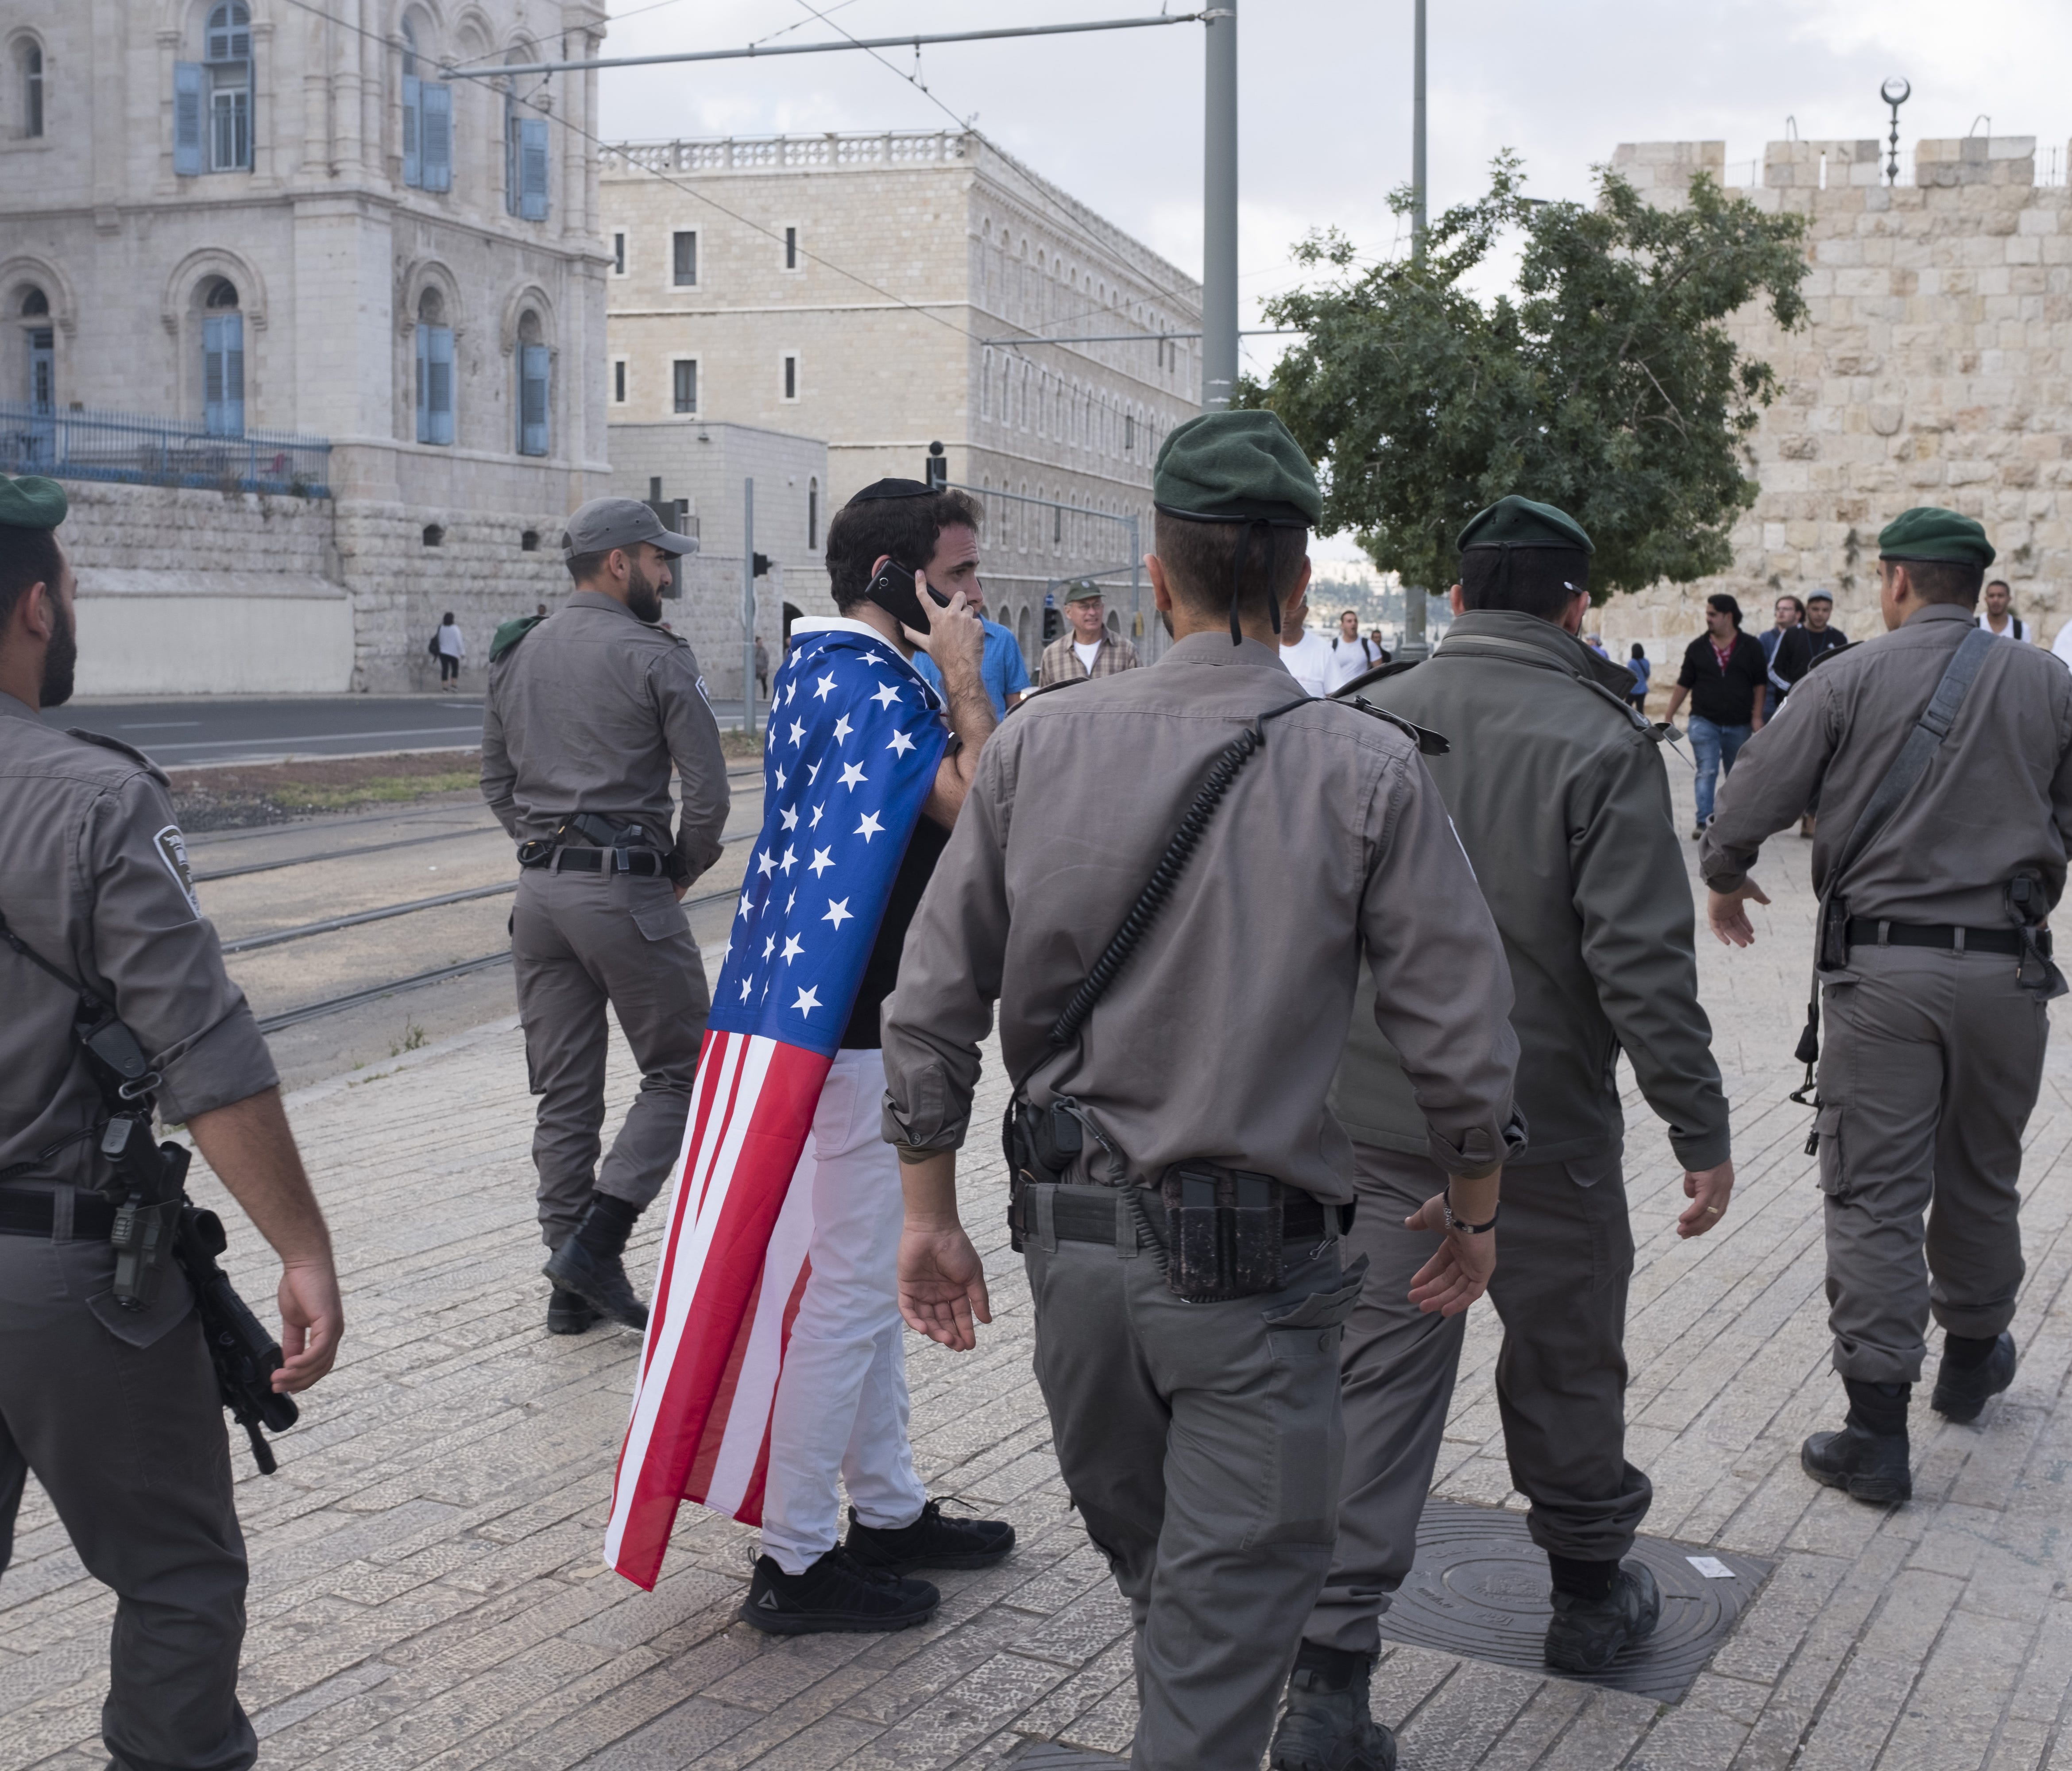 Israeli border policemen walk next to a man wearing an American flag outside the Old City on May 13, 2018 in Jerusalem, Israel. Israel mark Jerusalem Day celebrations  the 51th anniversary of its capture of Arab east Jerusalem in the Six Day War of 1